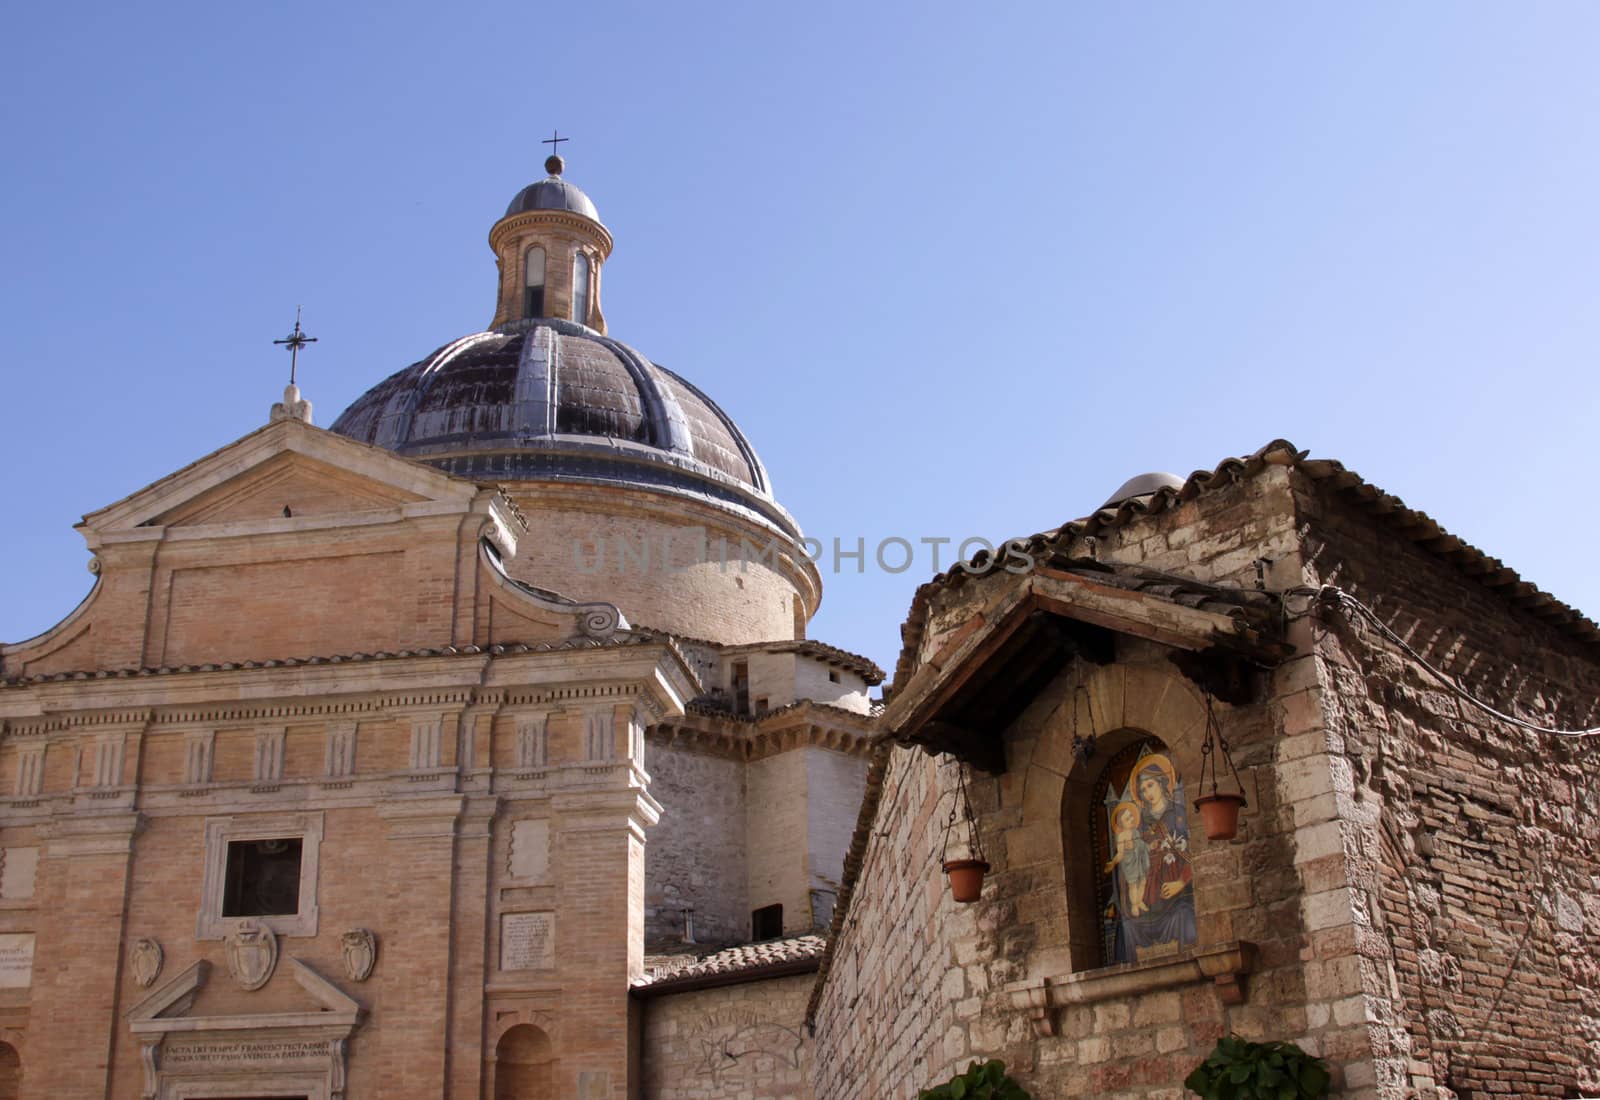 The Chiesa Nuova is a church in Assisi, Italy.  It is built on birthplace of St. Francis in 1615.